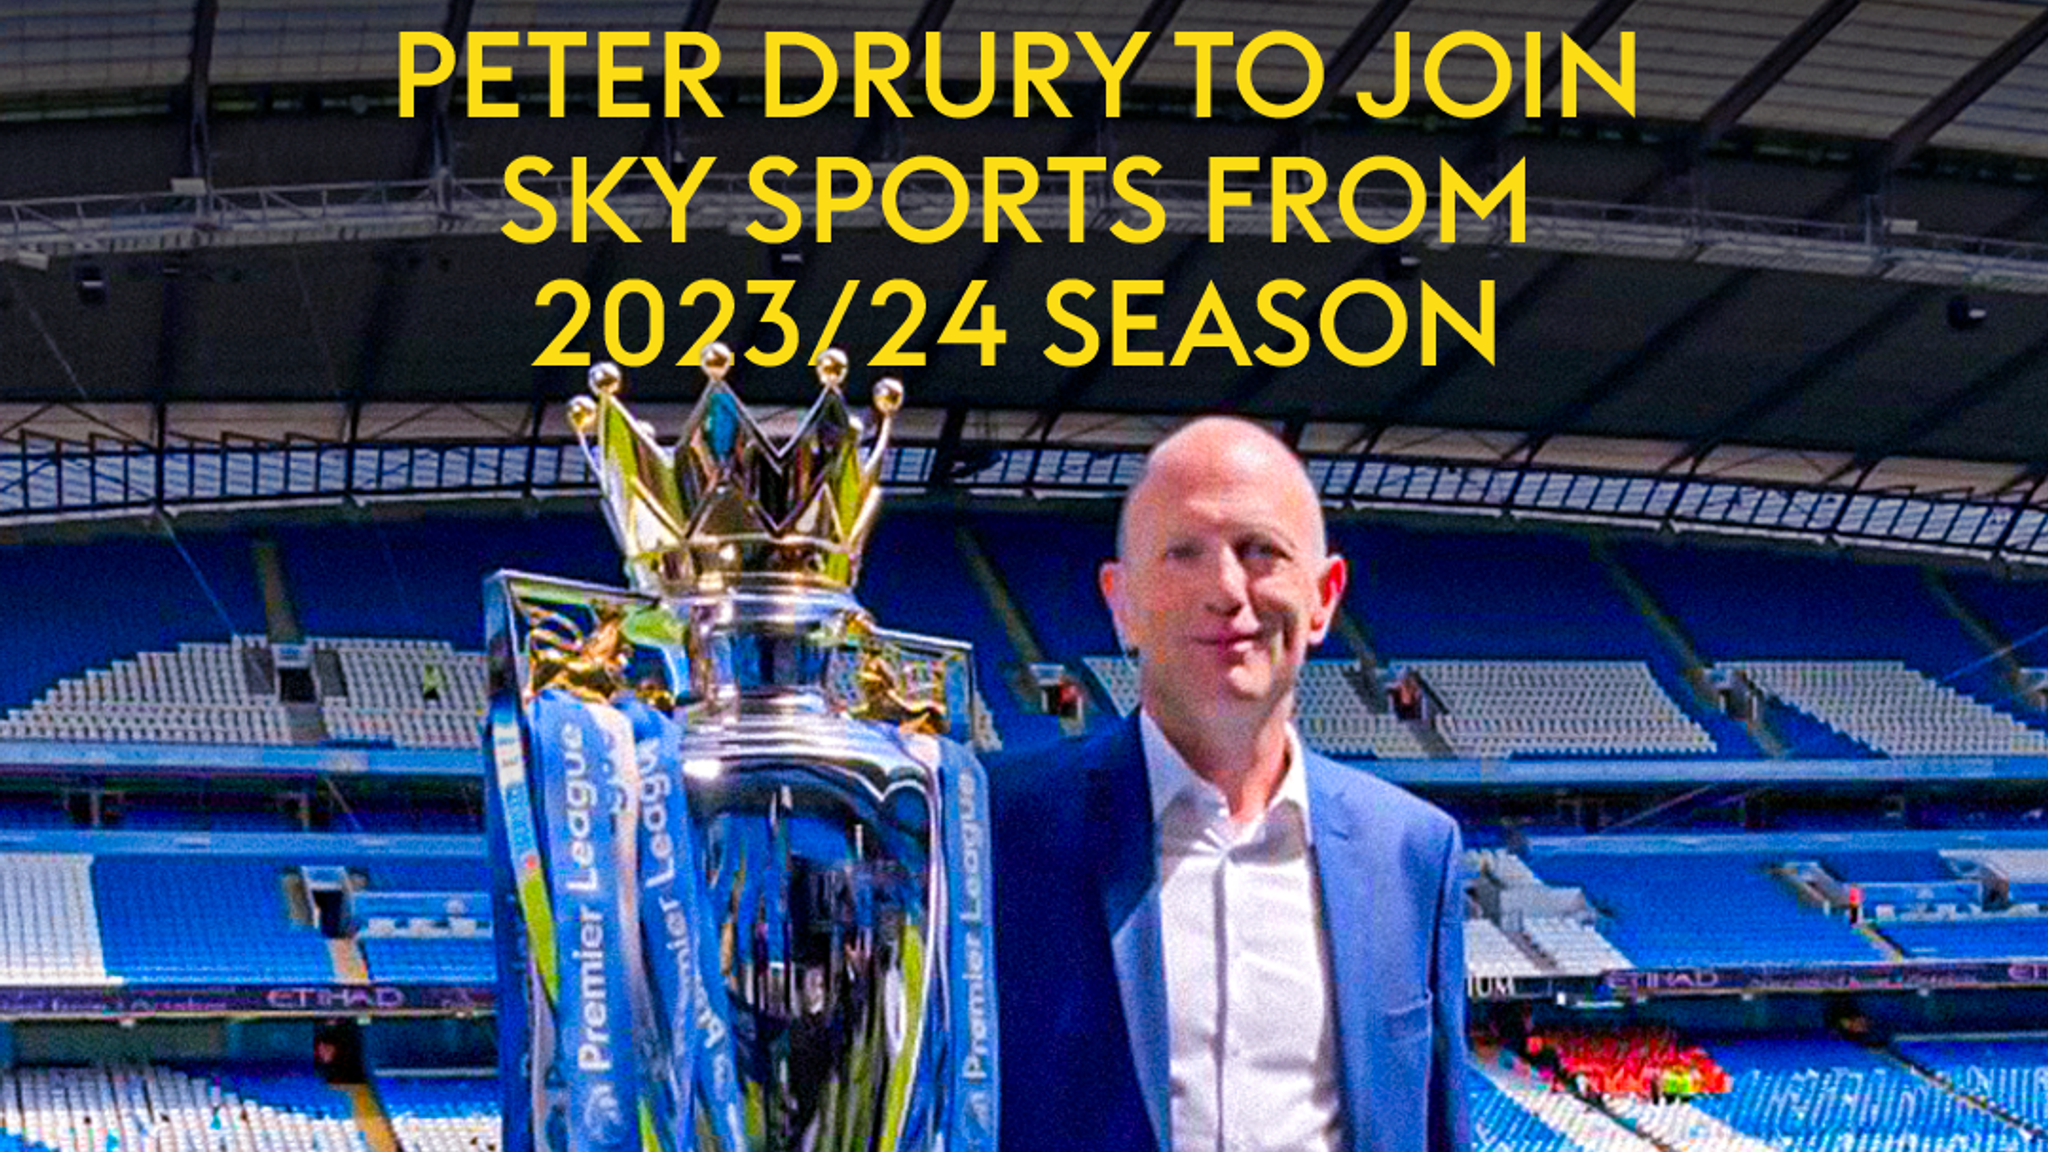 Peter Drury Sky Sports announce signing of experienced commentator from 2023/24 Premier League season Football News Sky Sports